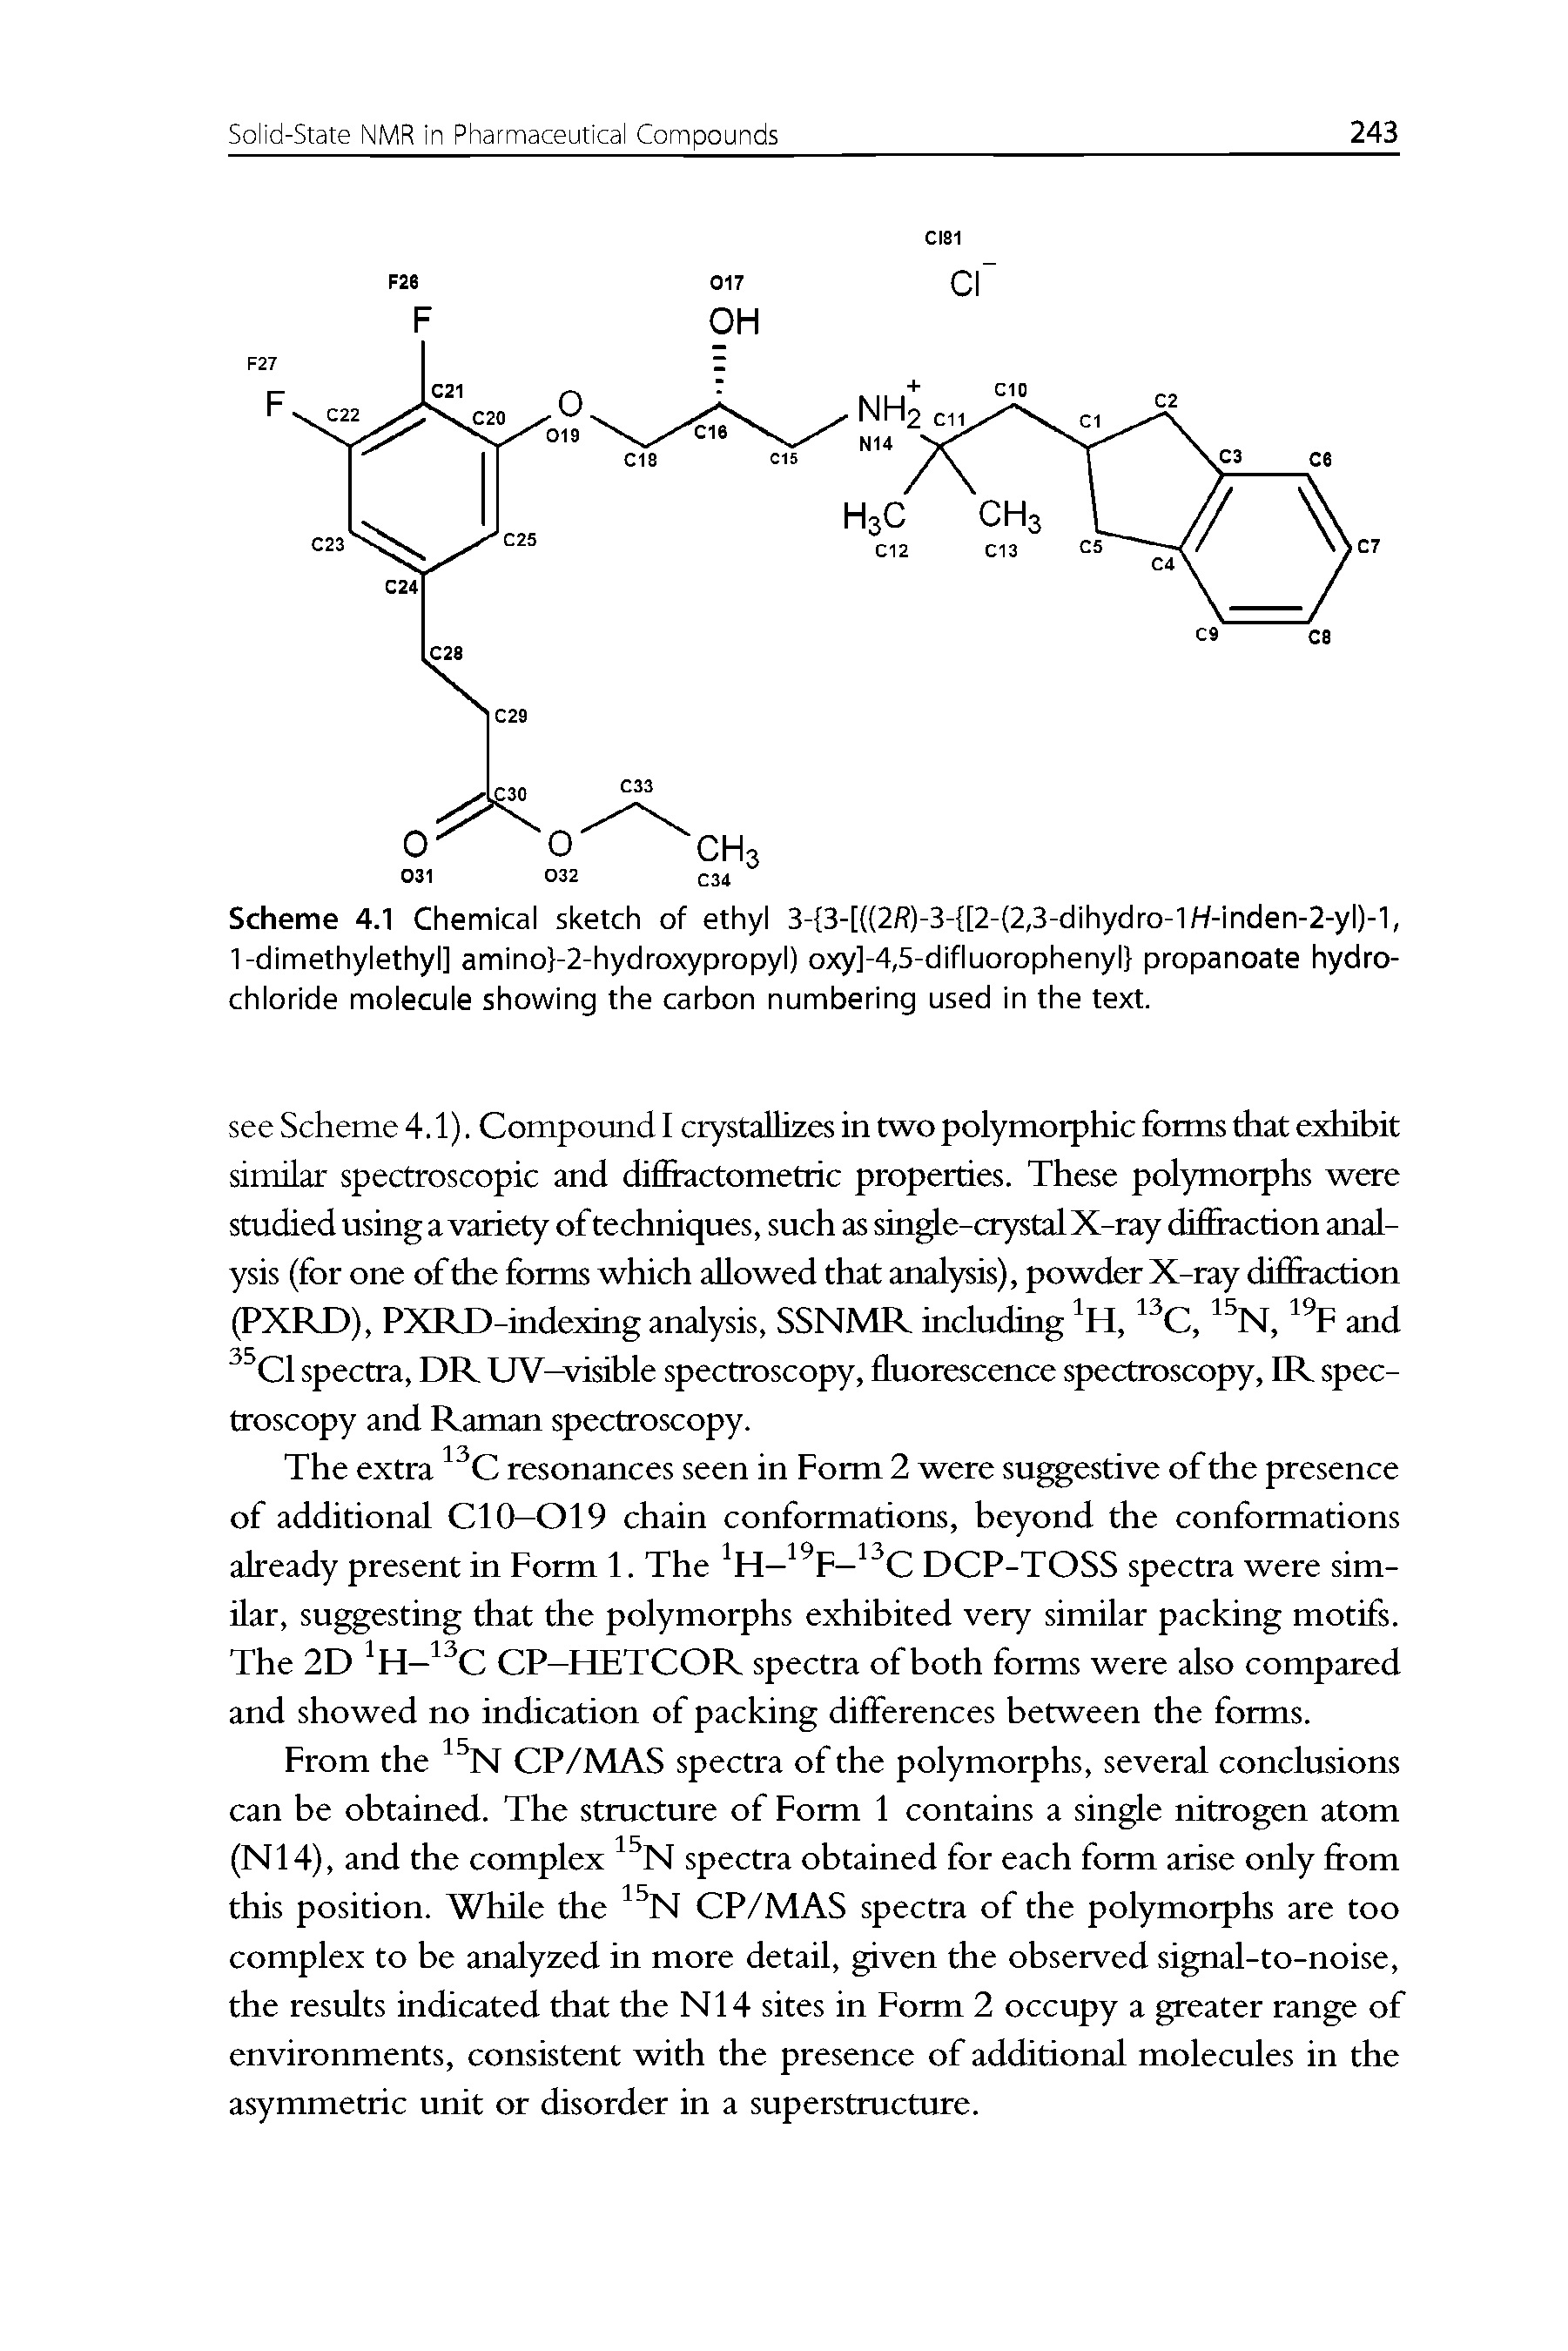 Scheme 4.1 Chemical sketch of ethyl 3- 3-[((2/ )-3- [2-(2,3-dihydro-1H-inden-2-yl)-1, 1-dimethylethyl] amino -2-hydroxypropyl) oxy]-4,5-difluorophenyl propanoate hydrochloride molecule showing the carbon numbering used in the text.